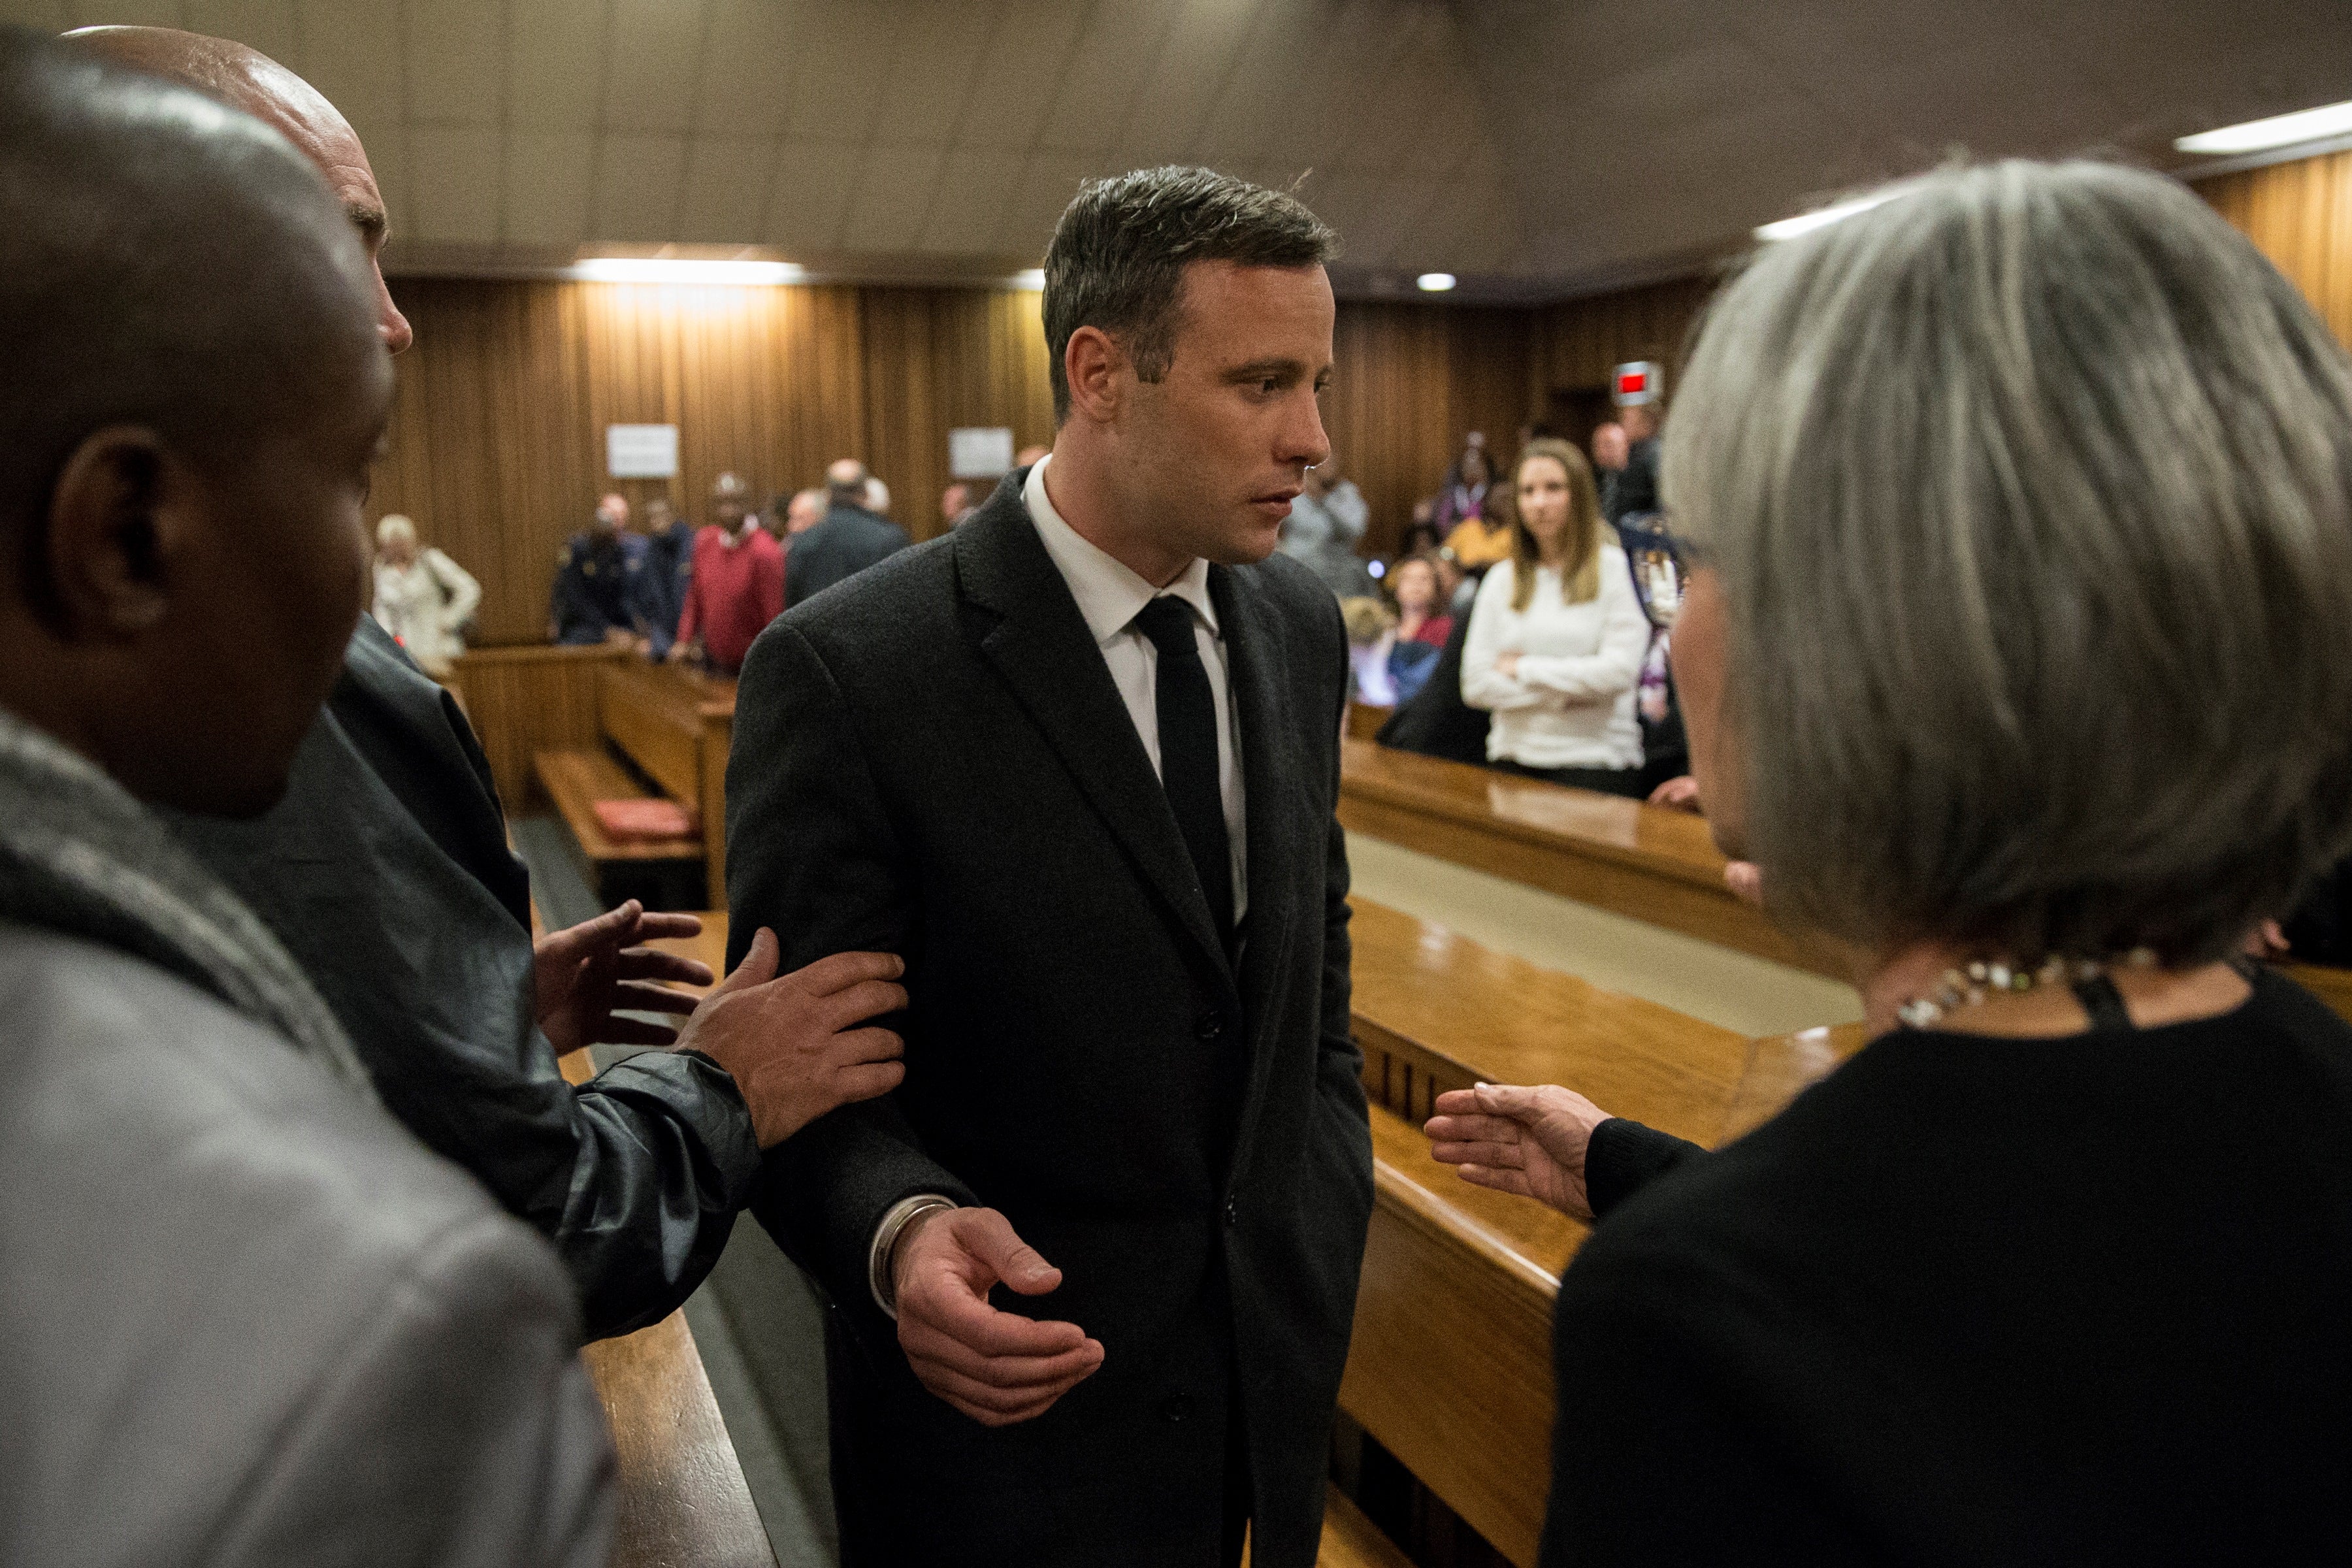 Olympic athlete Oscar Pistorius speaks with relatives after sentencing at the High Court on 6 July 2016 at the High Court in Pretoria, South Africa